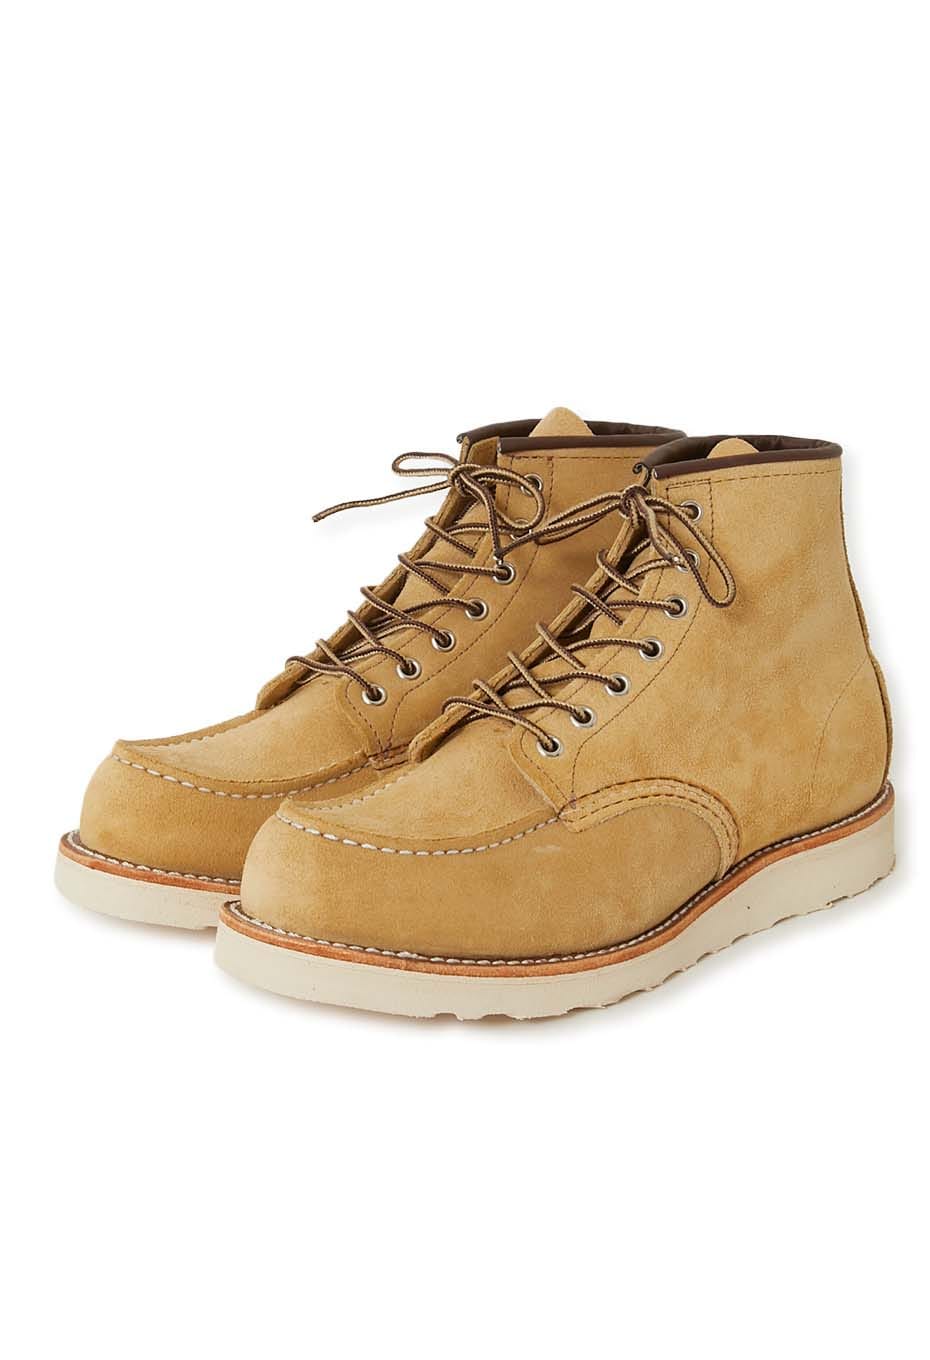 RED WING #8833D 6インチ クラシック モック